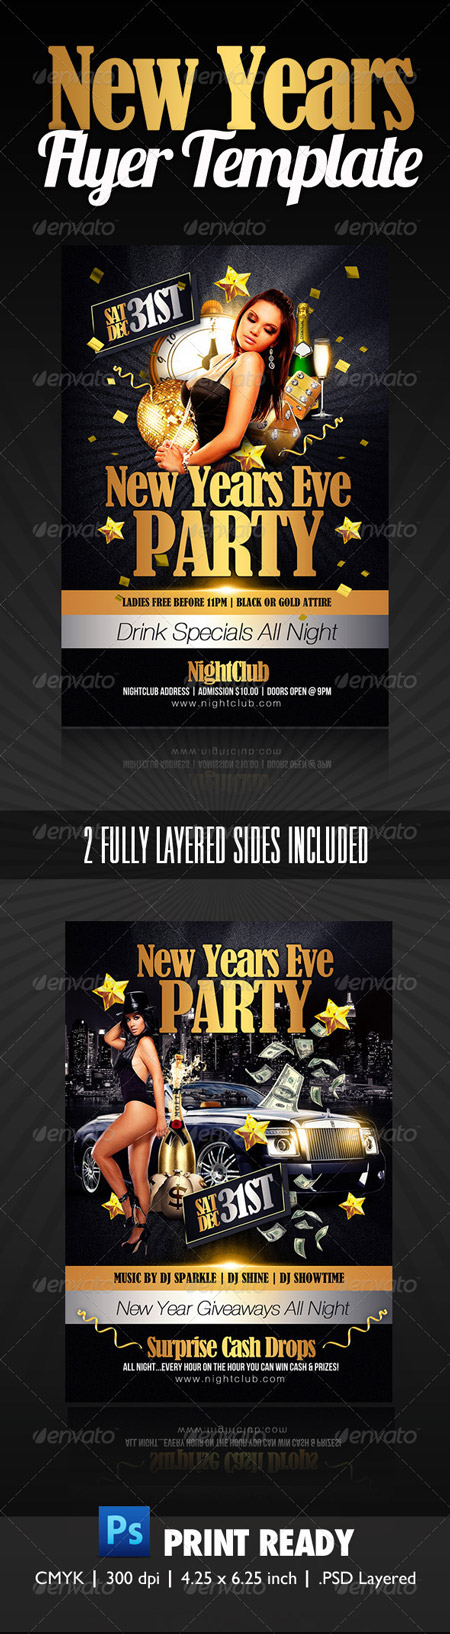 GraphicRiver New Years Party Flyer 1127709